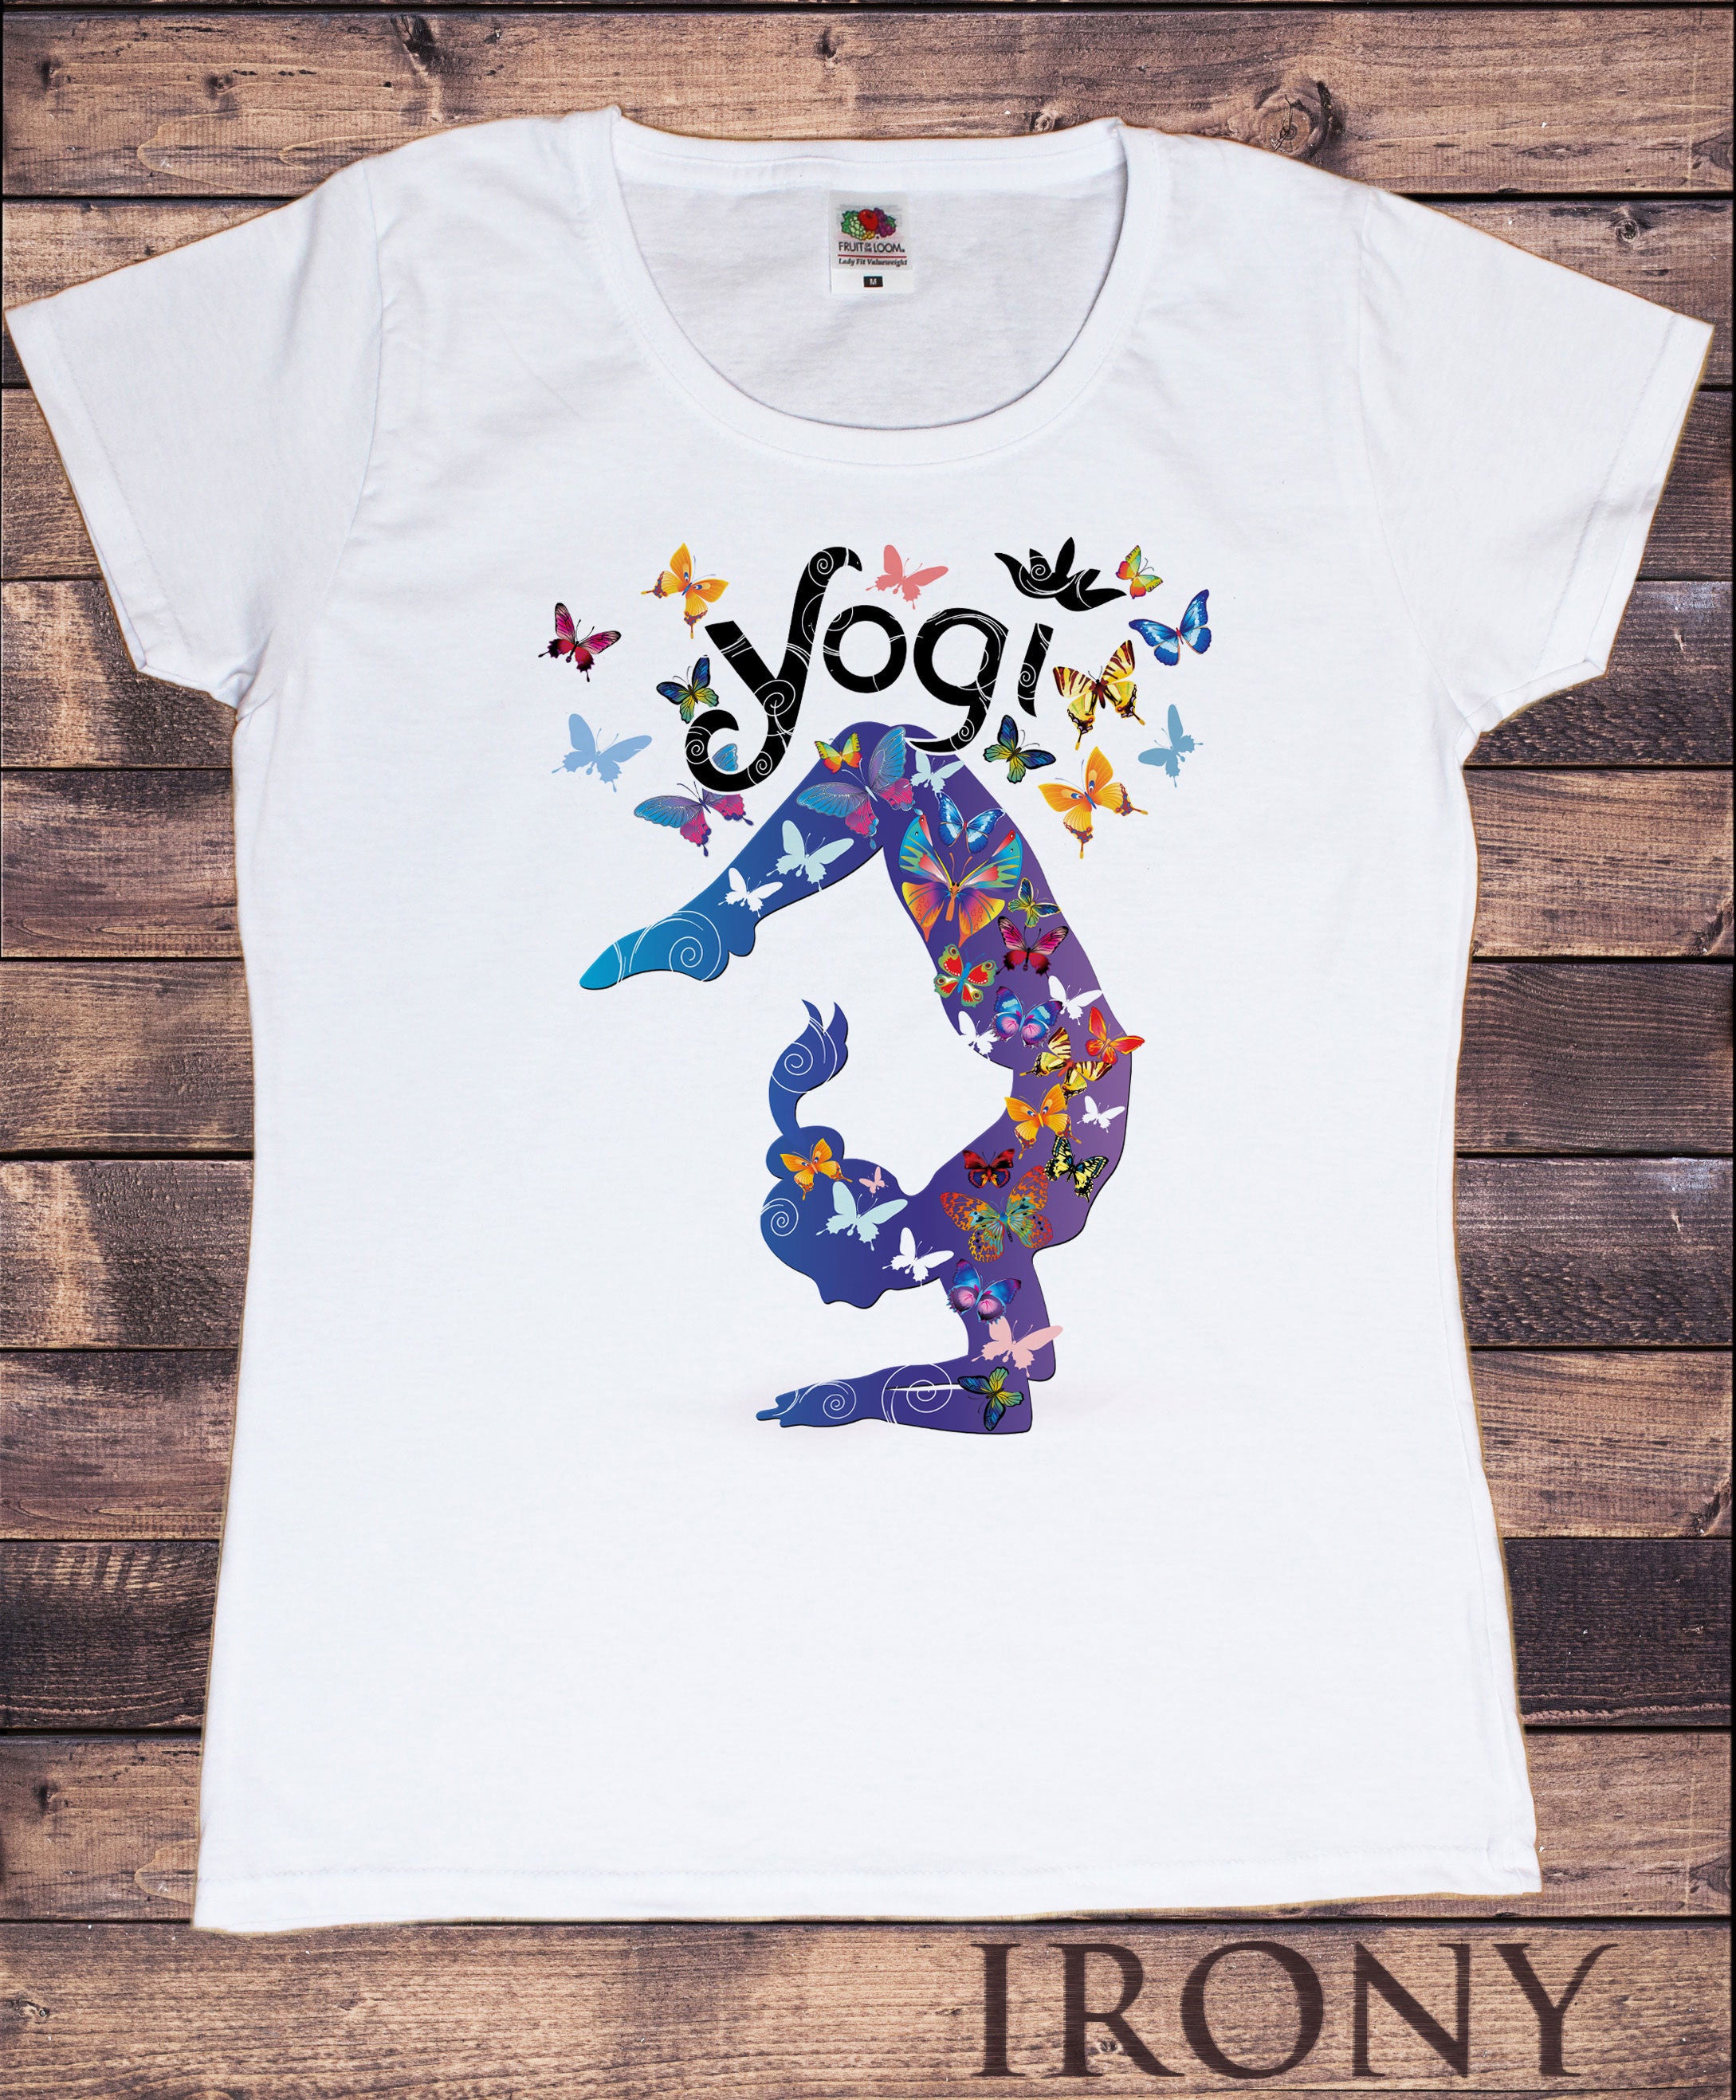 Women's T-shirts from Yoga